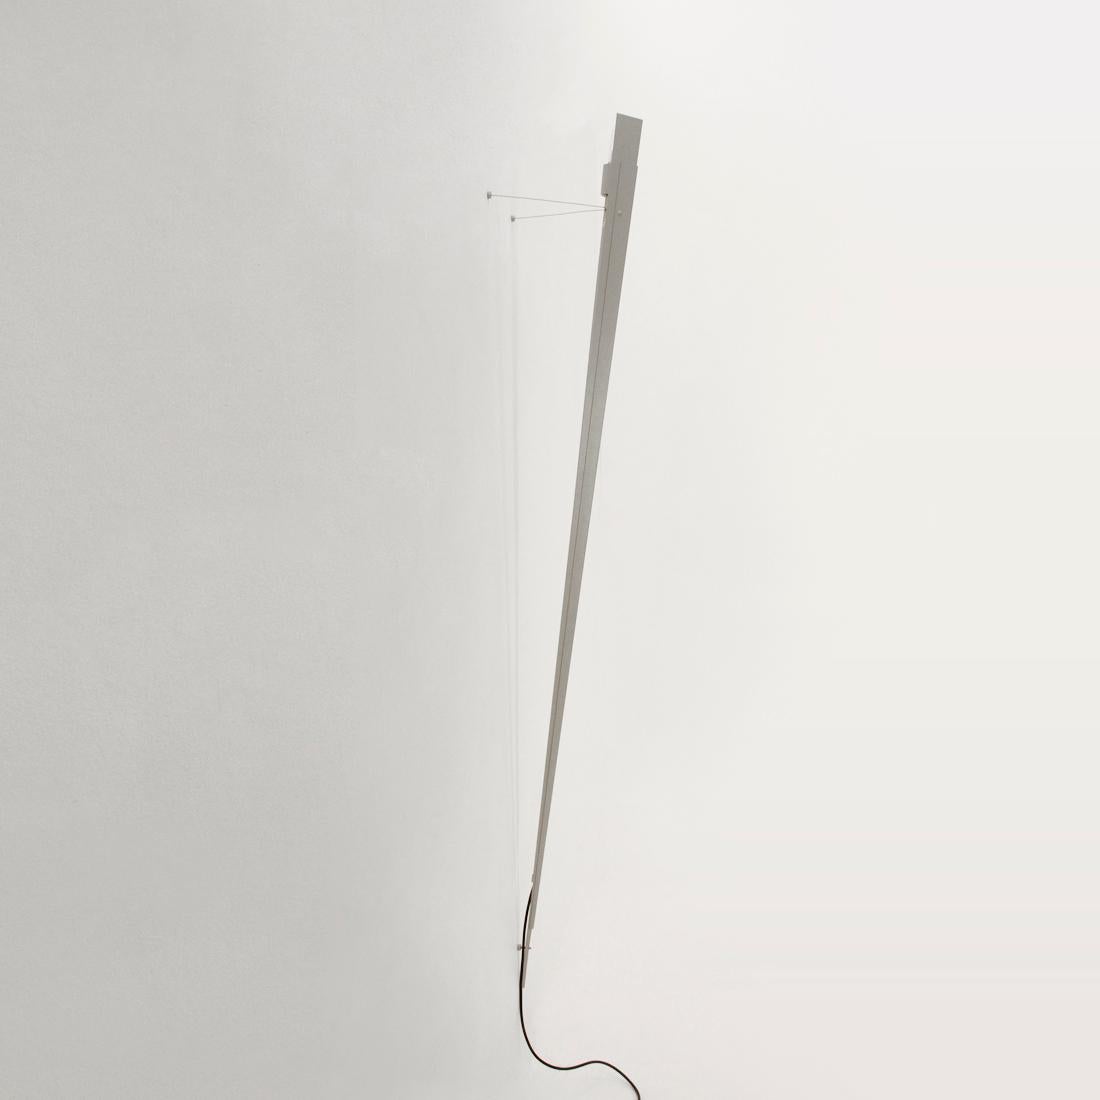 Wall lamp produced in the 1980s by Lumen Center designed by Gilles Derain.
Metal structure resting on the ground and holding up to the wall with two tie rods.
Good general conditions, some signs due to normal use over time.

Dimensions: Length